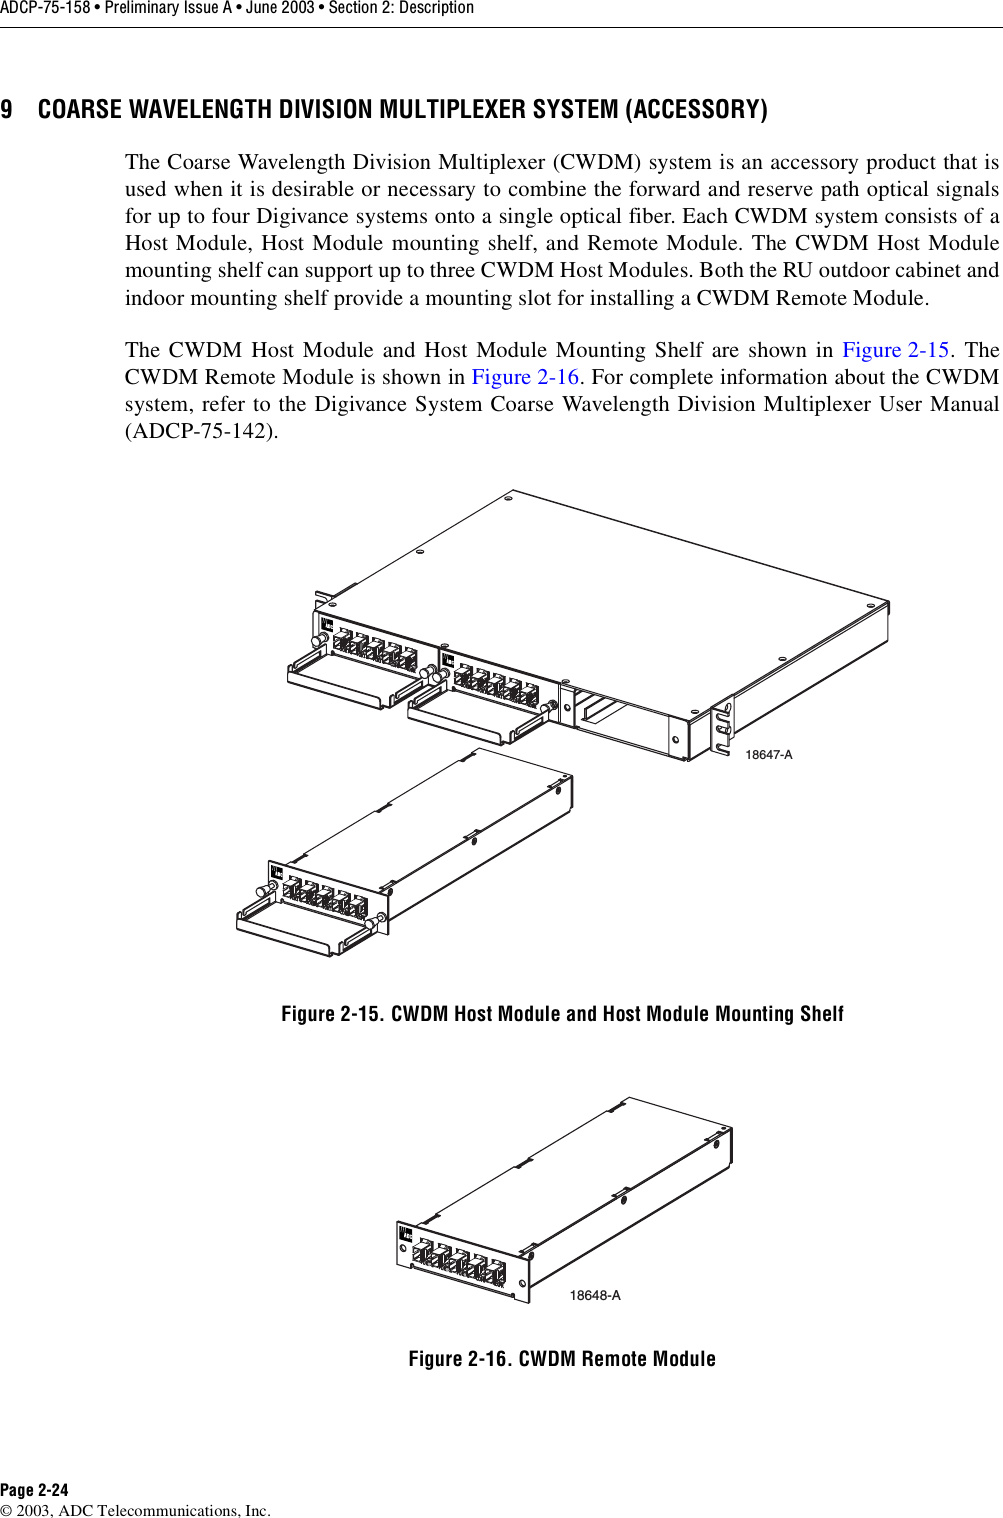 ADCP-75-158 • Preliminary Issue A • June 2003 • Section 2: DescriptionPage 2-24© 2003, ADC Telecommunications, Inc.9 COARSE WAVELENGTH DIVISION MULTIPLEXER SYSTEM (ACCESSORY)The Coarse Wavelength Division Multiplexer (CWDM) system is an accessory product that isused when it is desirable or necessary to combine the forward and reserve path optical signalsfor up to four Digivance systems onto a single optical fiber. Each CWDM system consists of aHost Module, Host Module mounting shelf, and Remote Module. The CWDM Host Modulemounting shelf can support up to three CWDM Host Modules. Both the RU outdoor cabinet andindoor mounting shelf provide a mounting slot for installing a CWDM Remote Module. The CWDM Host Module and Host Module Mounting Shelf are shown in Figure 2-15. TheCWDM Remote Module is shown in Figure 2-16. For complete information about the CWDMsystem, refer to the Digivance System Coarse Wavelength Division Multiplexer User Manual(ADCP-75-142). Figure 2-15. CWDM Host Module and Host Module Mounting ShelfFigure 2-16. CWDM Remote Module18647-A18648-A